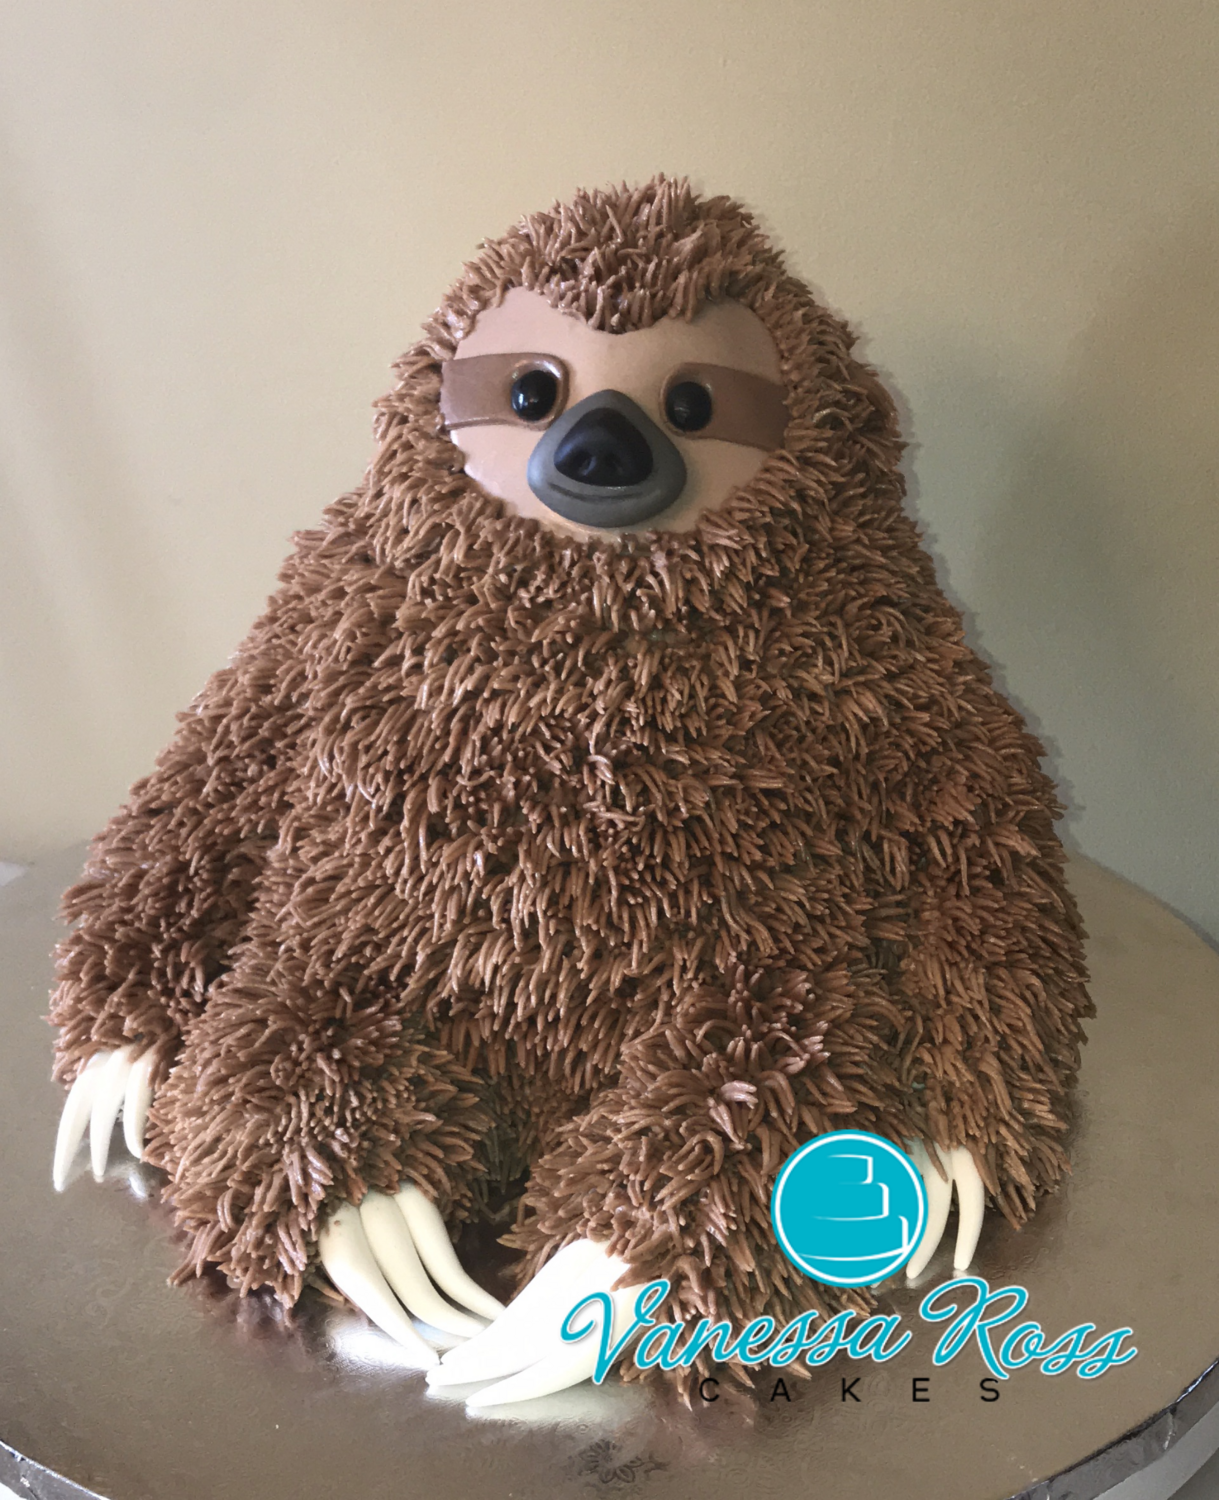 Carved Sloth Cake 
August 28, 2022 - 1-4pm